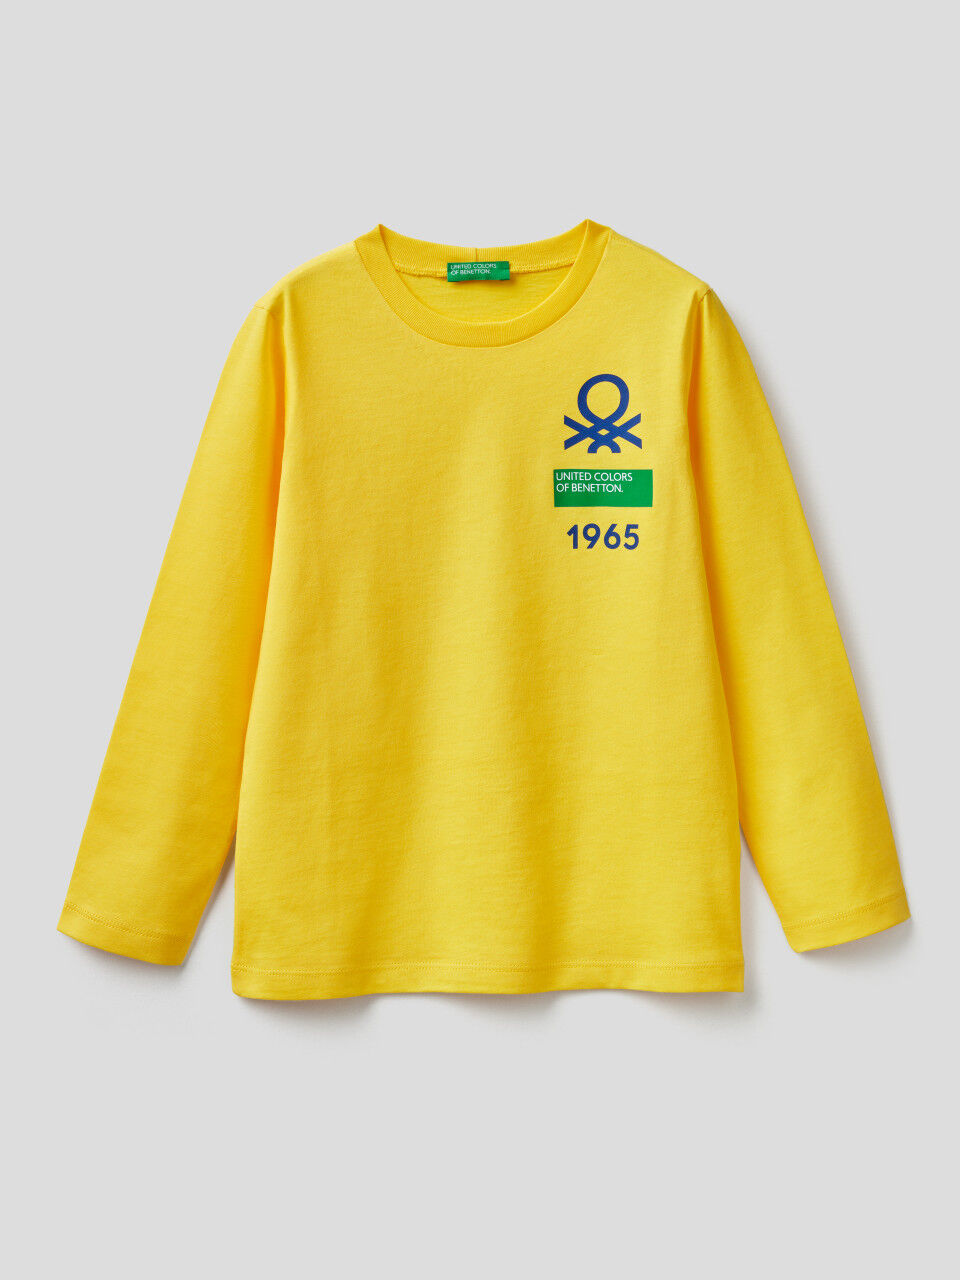 United Colors of Benetton Boys Long Sleeve Top